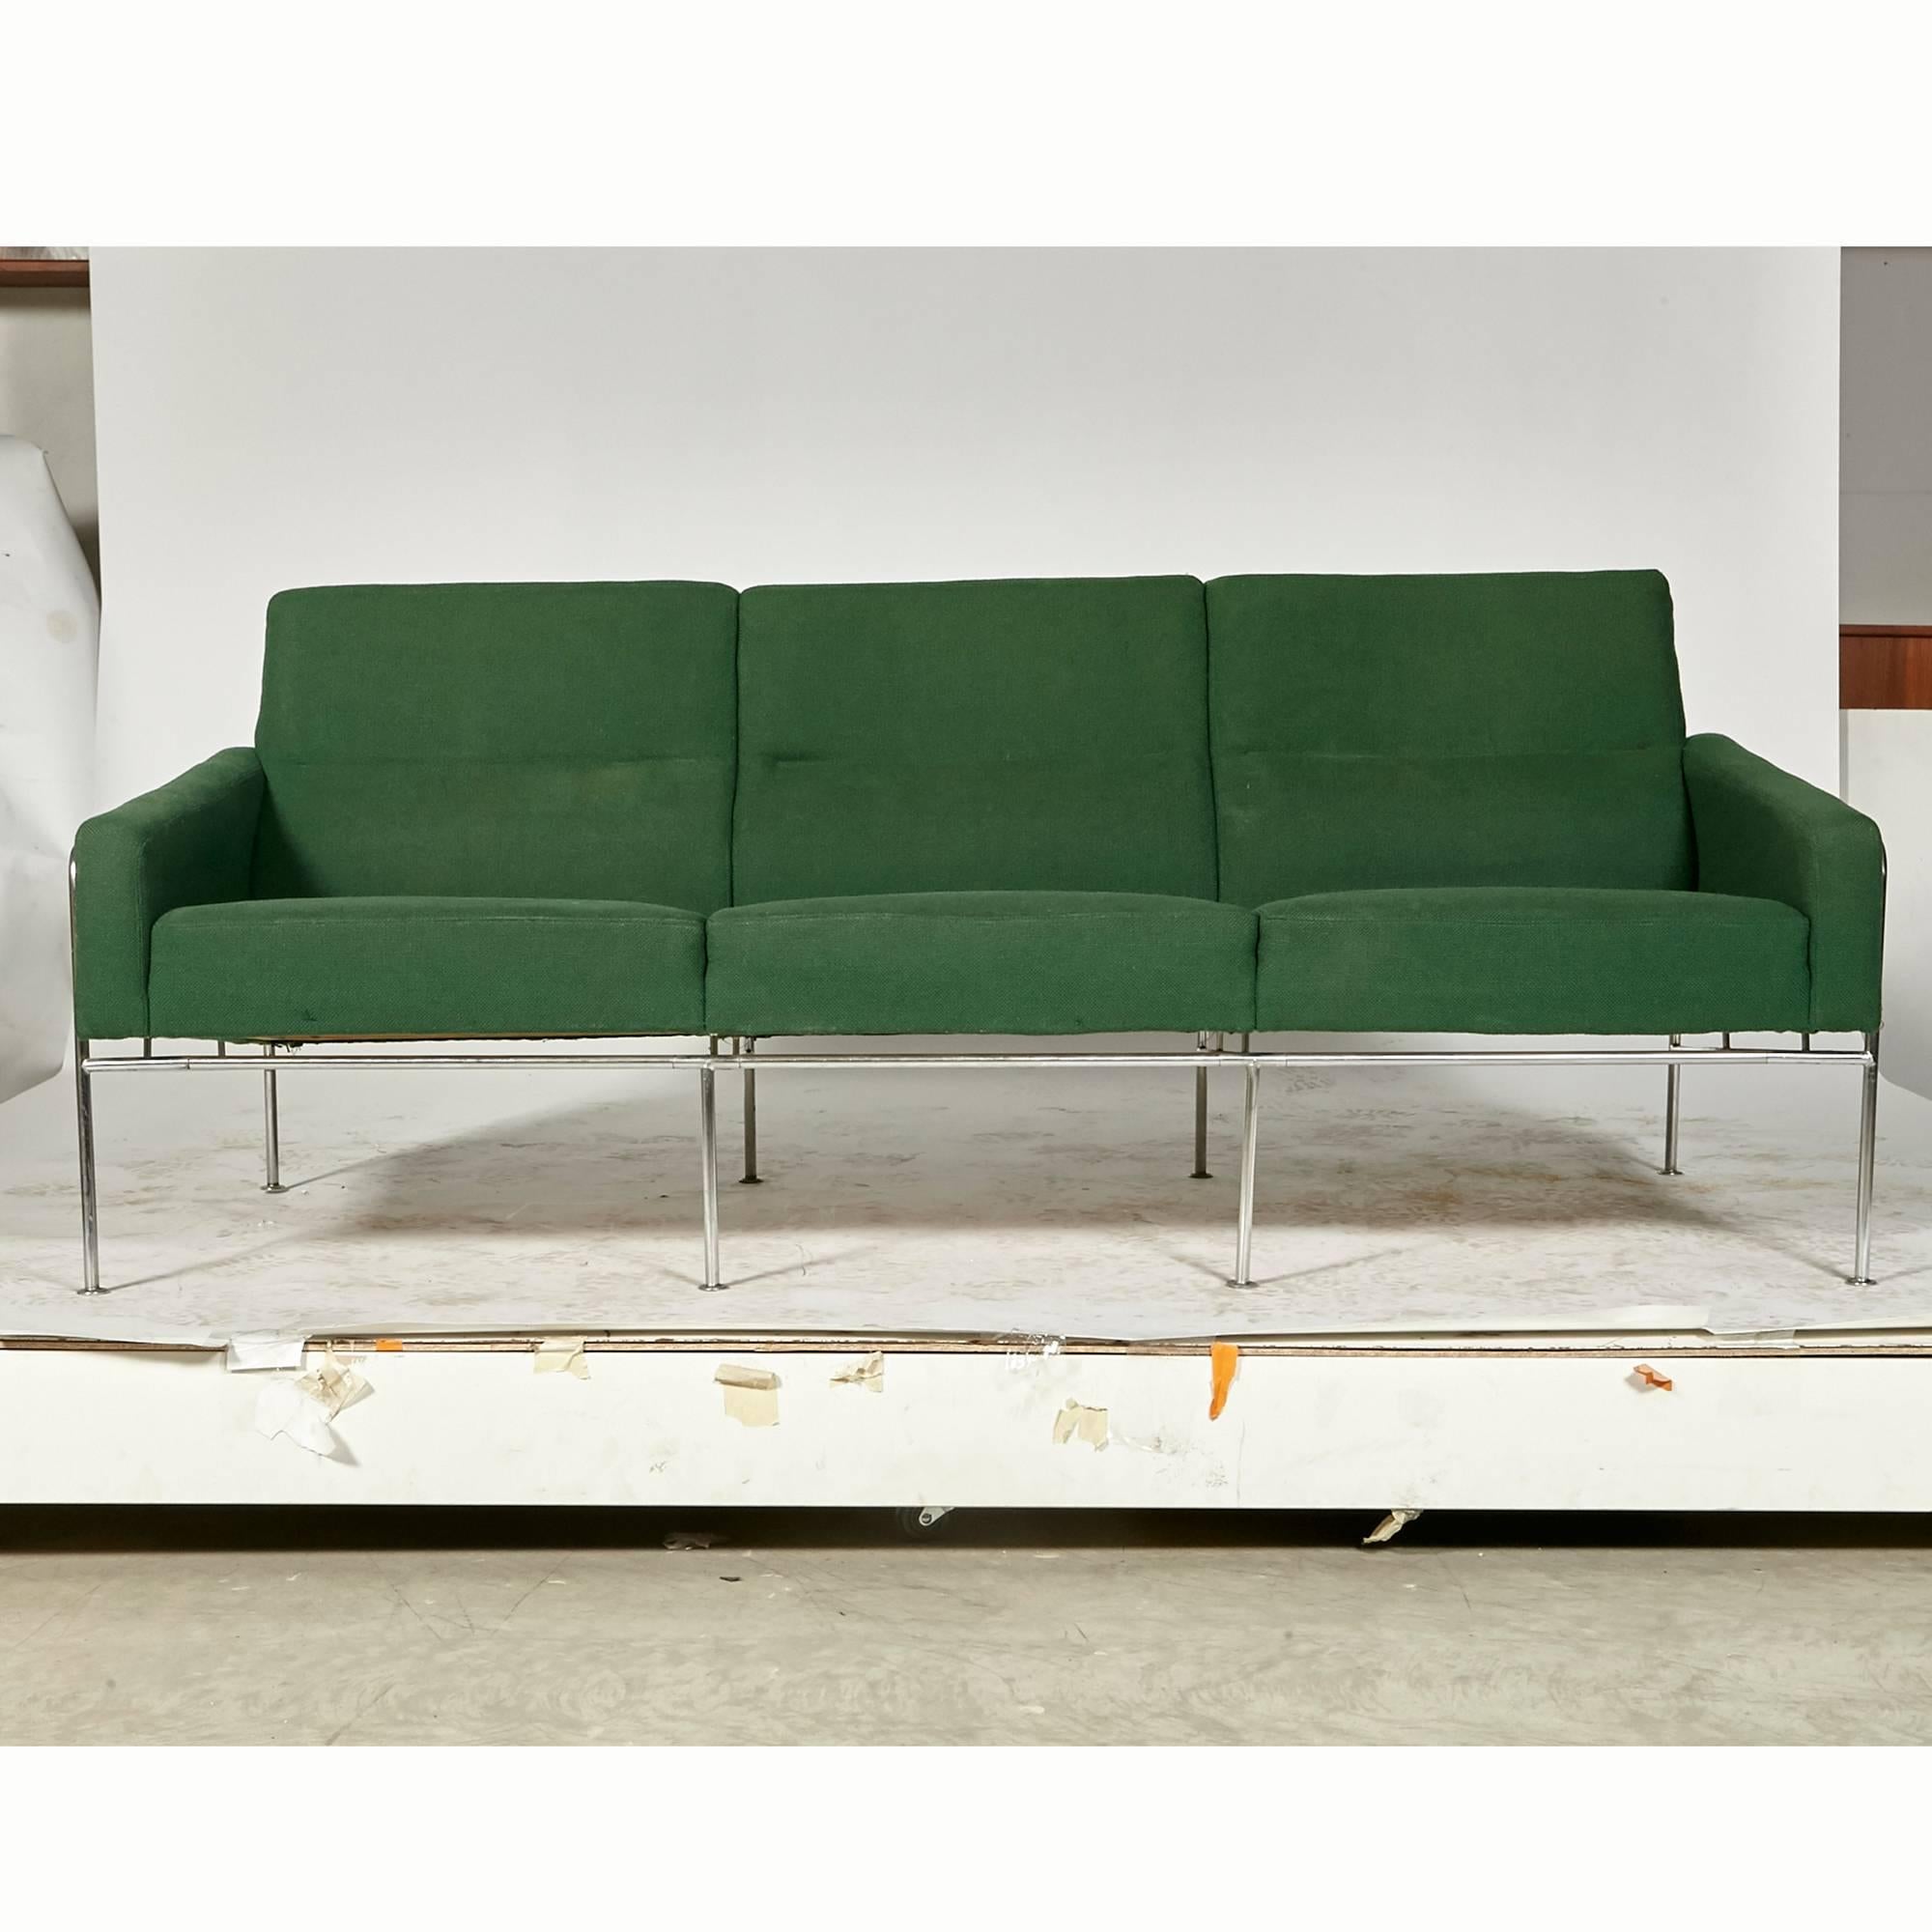 Original Danish three-seat airport sofa model 3300/3 designed by Arne Jacobsen for the SAS Royal Terminal in 1957 for Fritz Hansen. Sofa is on a chrome base with original green fabric. Marked.  Engraving of the School's Name that the Sofa Came From